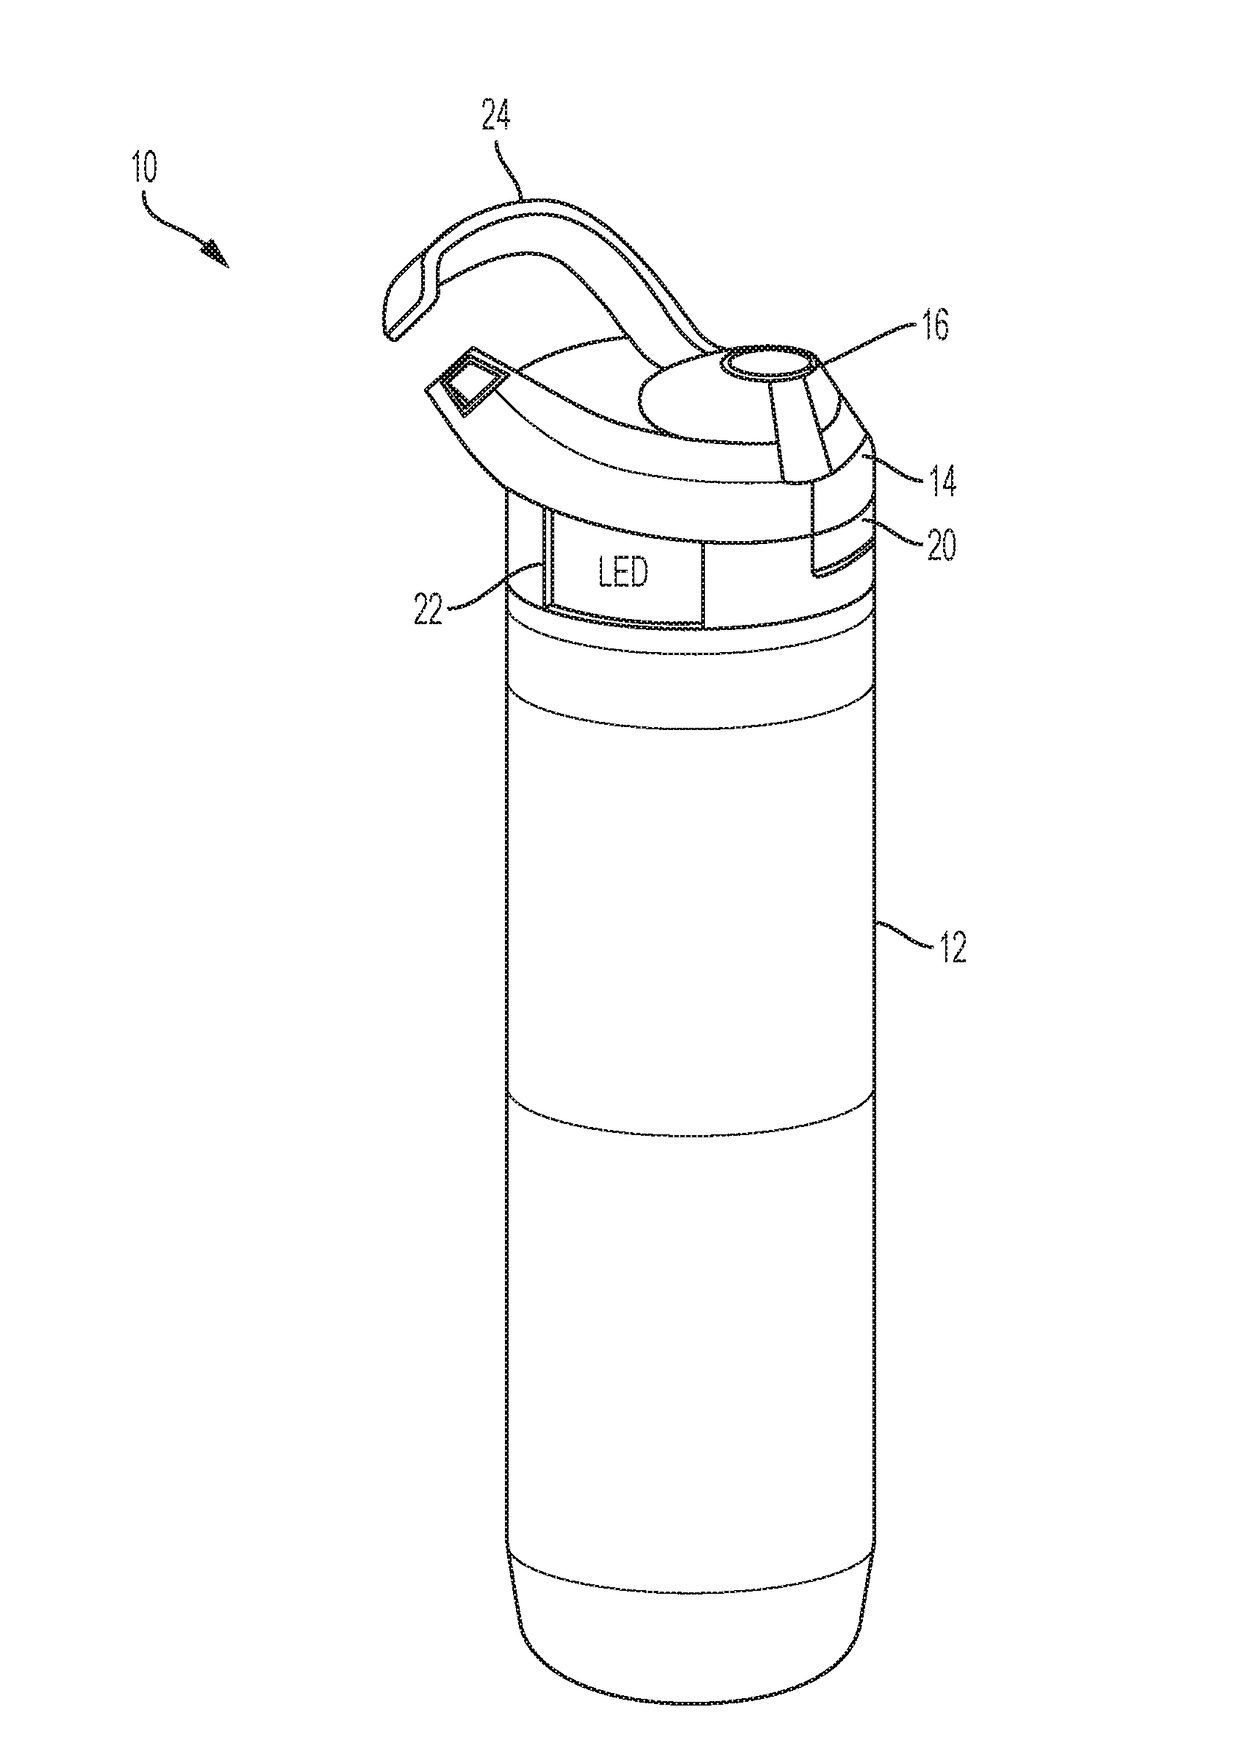 Drinking container with smart components for measuring volumes of liquids via cavity resonance